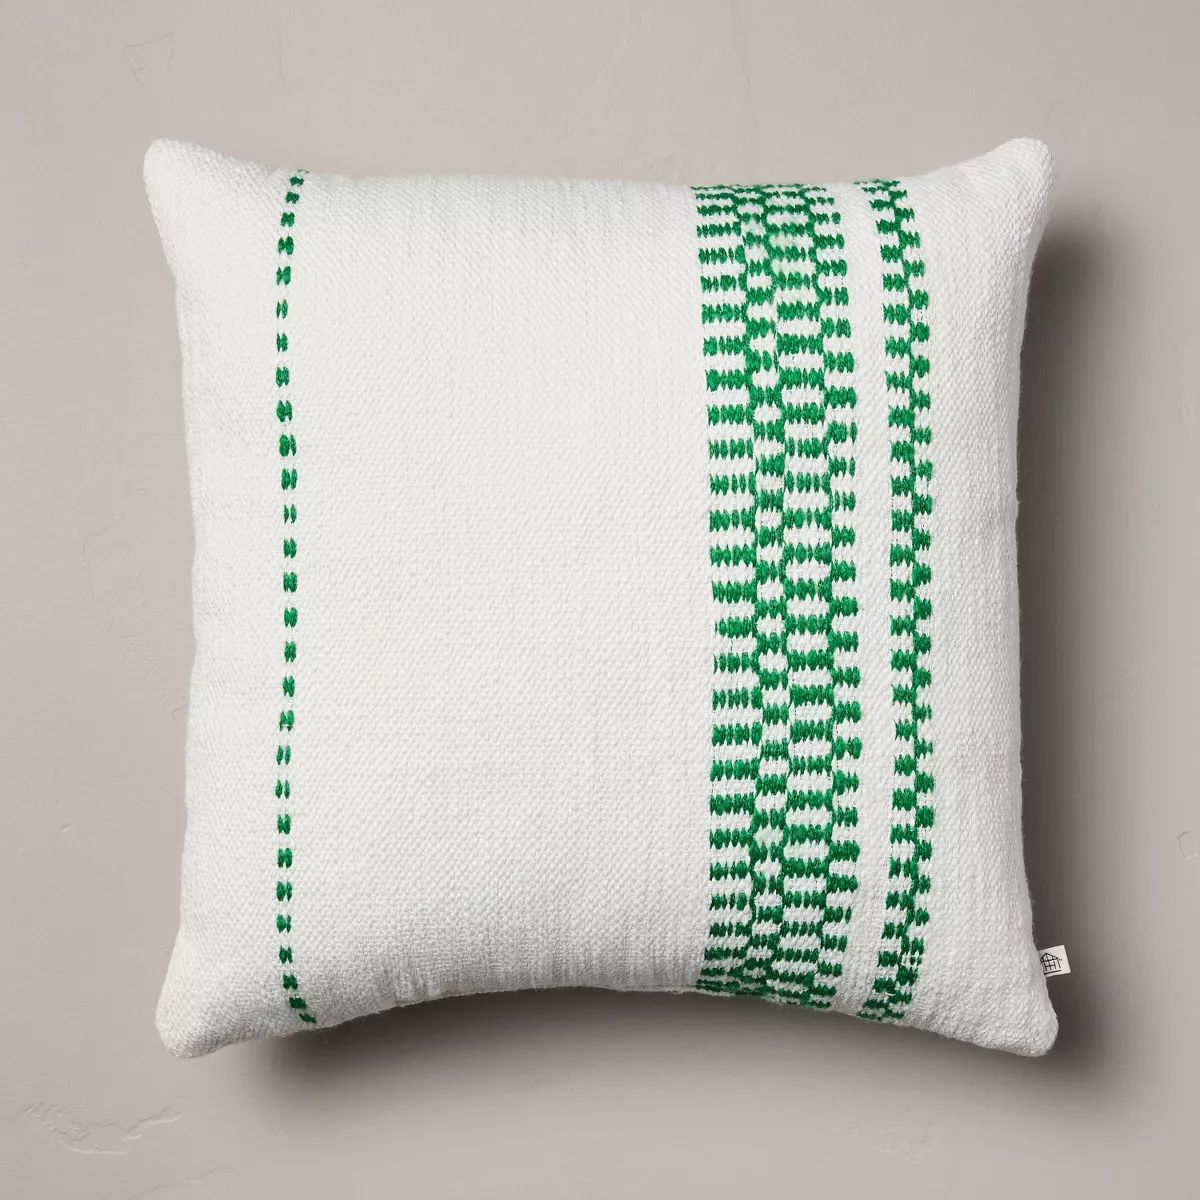 18"x18" Checkered Stripe Indoor/Outdoor Square Throw Pillow Cream/Green - Hearth & Hand™ with M... | Target